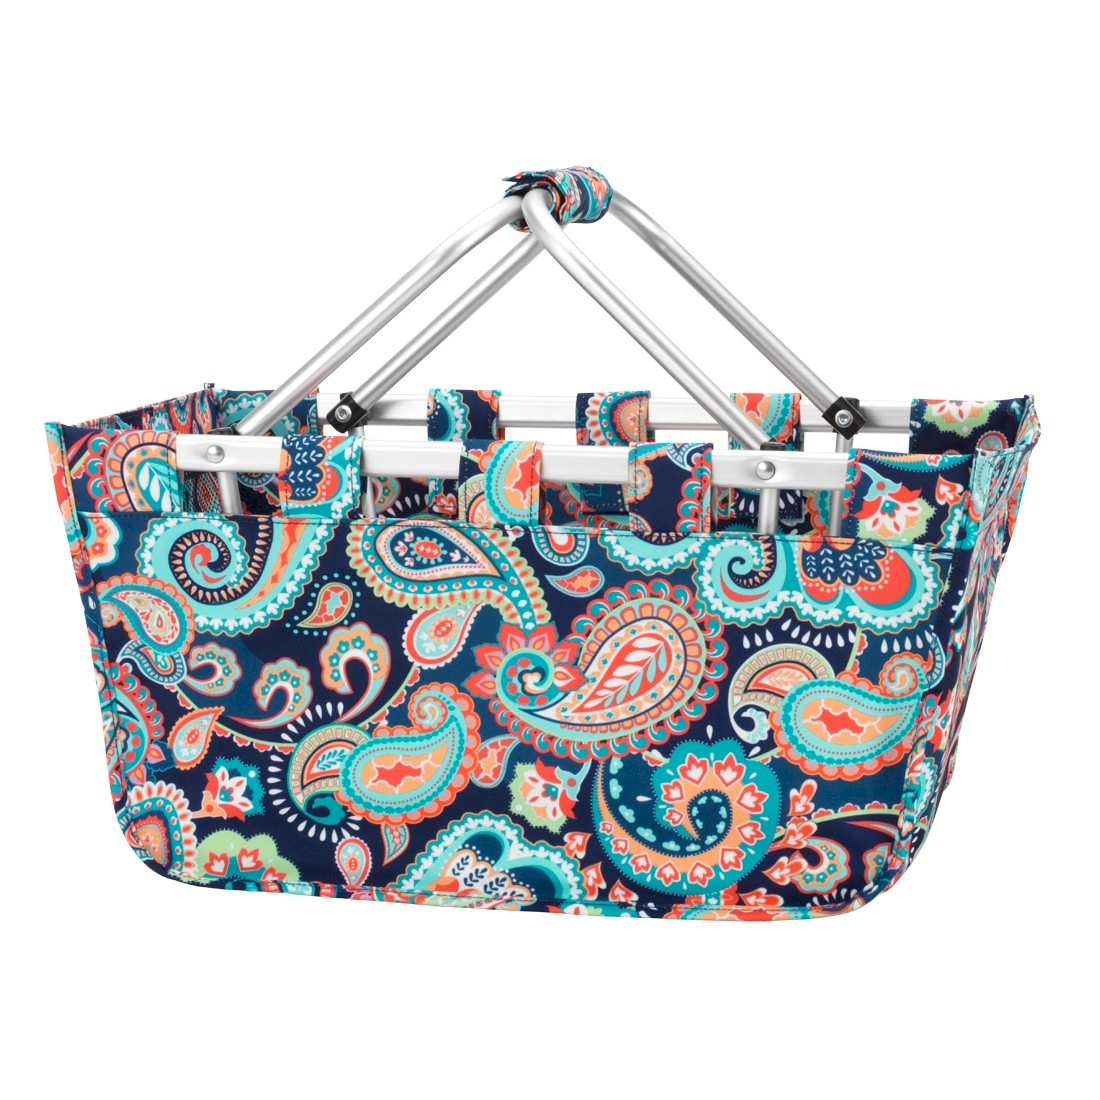 Foldable Market Tote Embroidery Blanks - EMERSON PAISLEY 